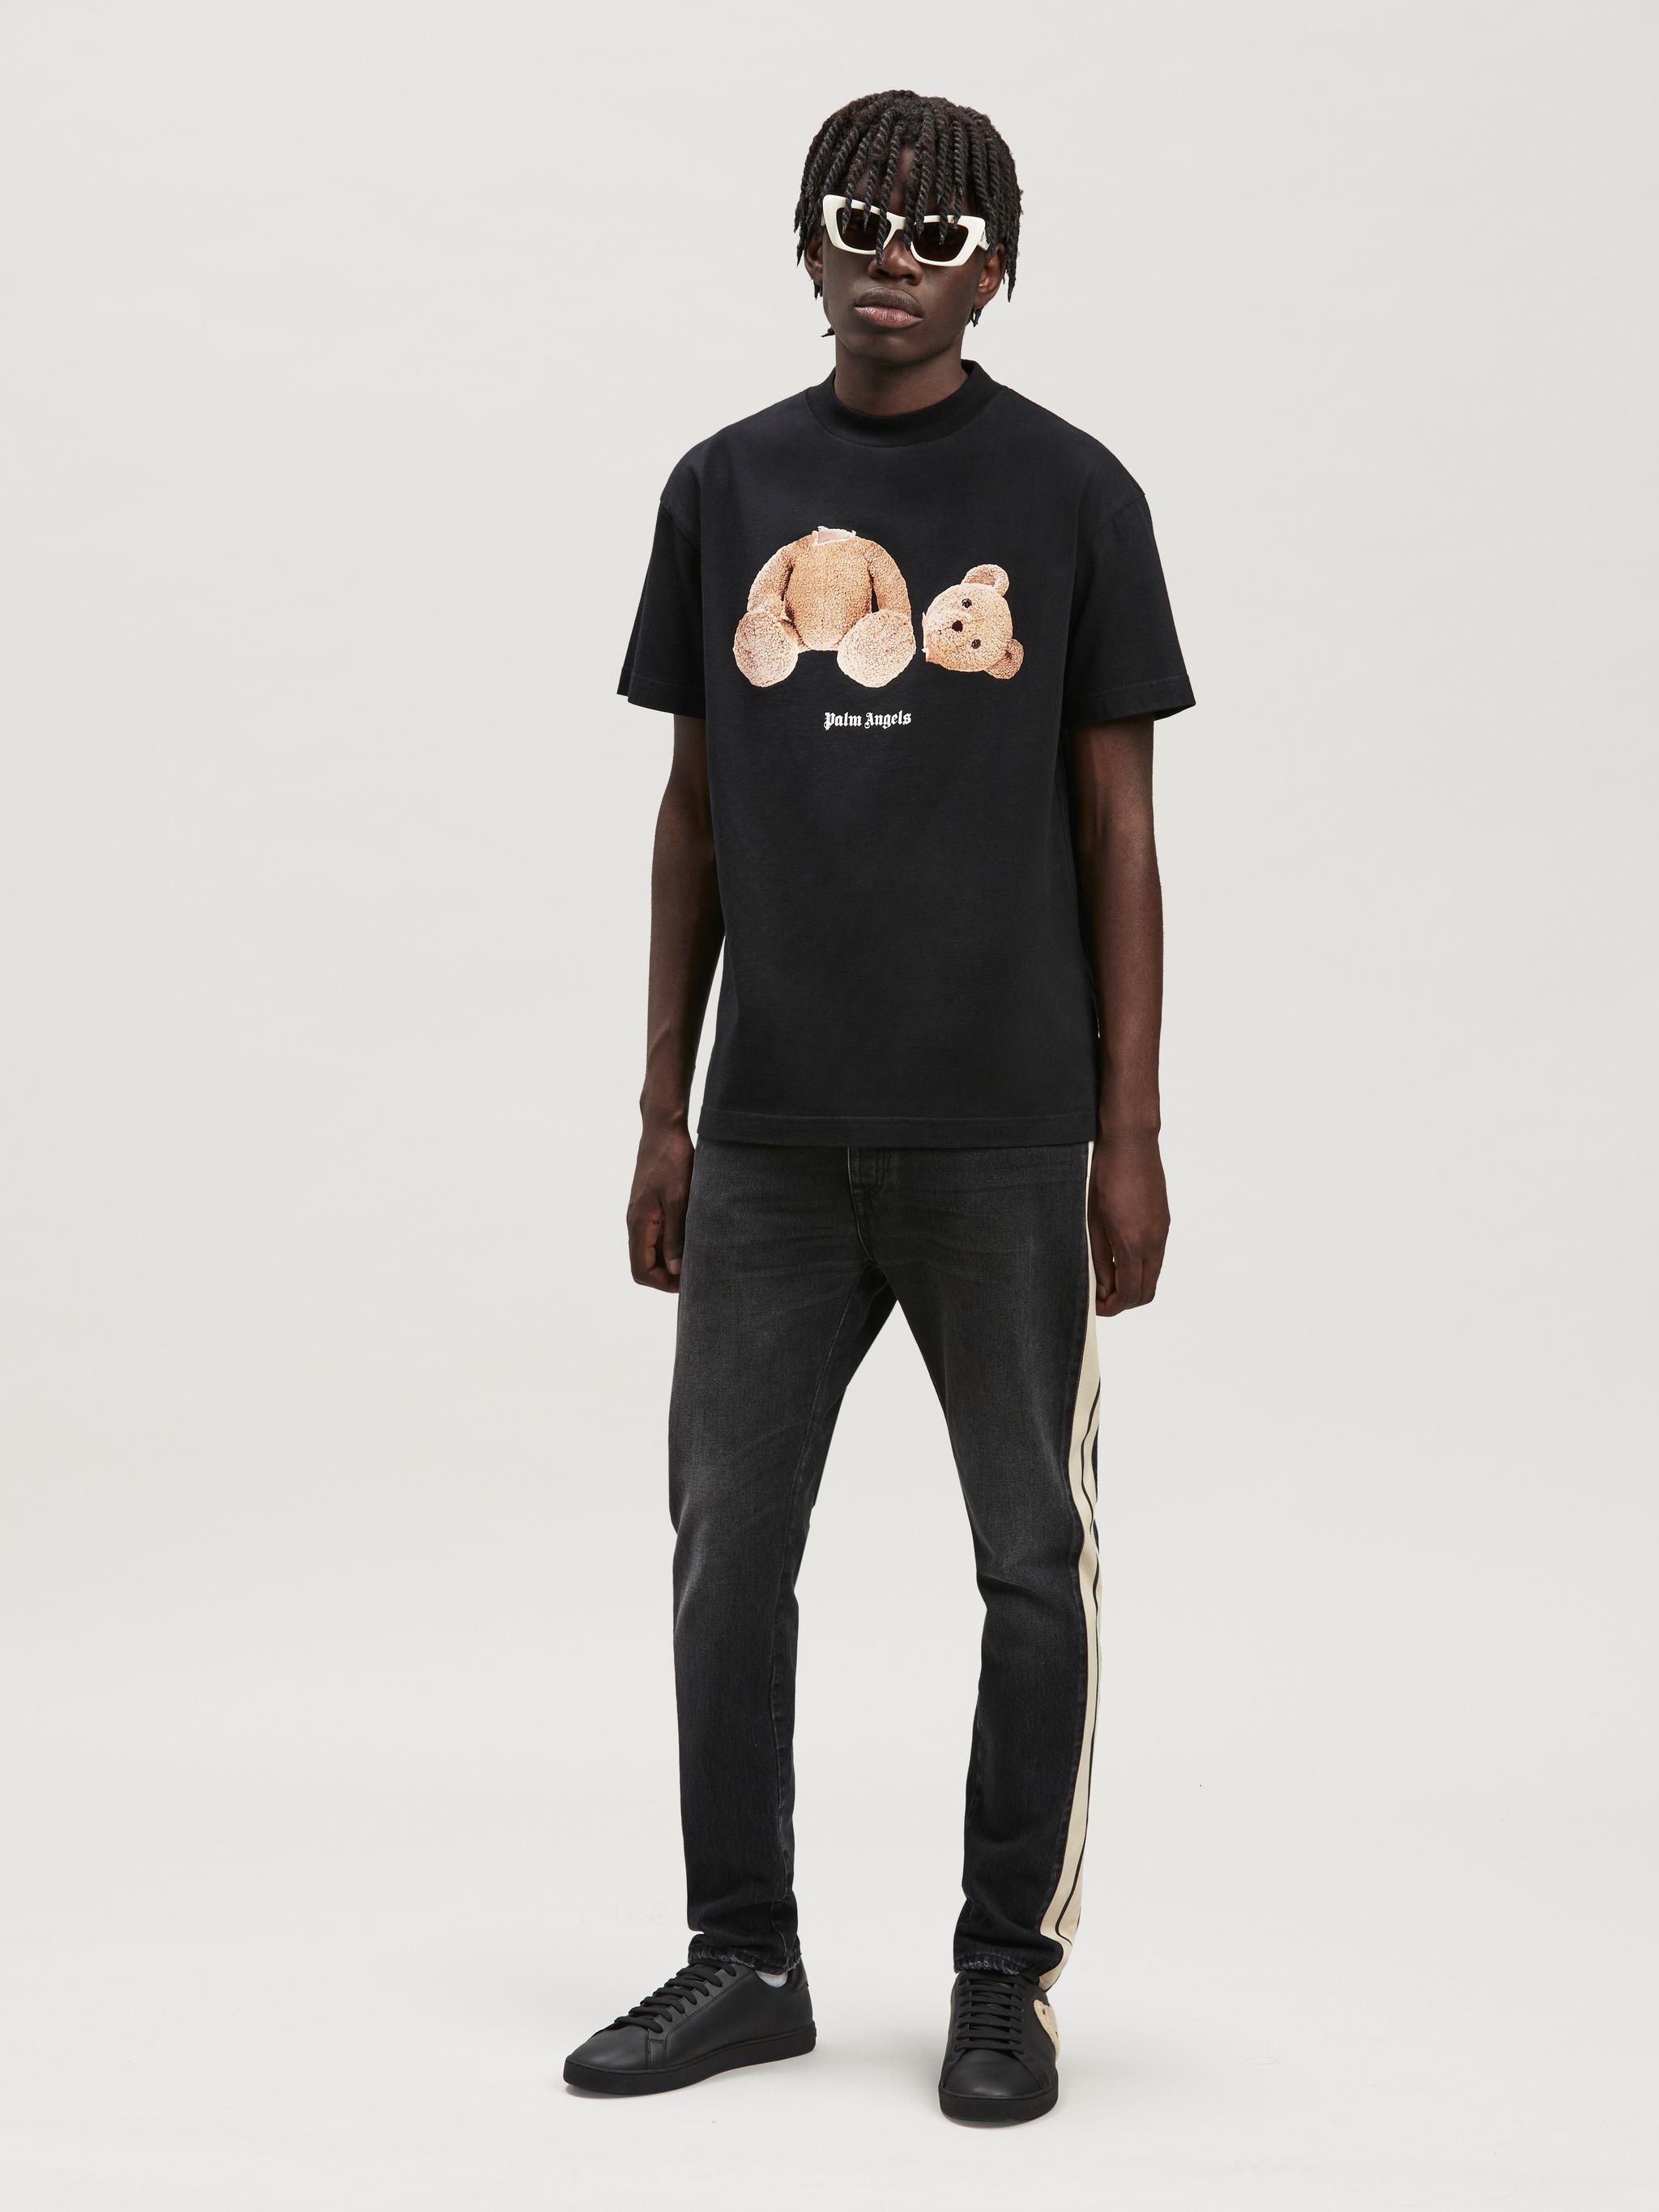 PIRATE BEAR T-SHIRT in black - Palm Angels® Official